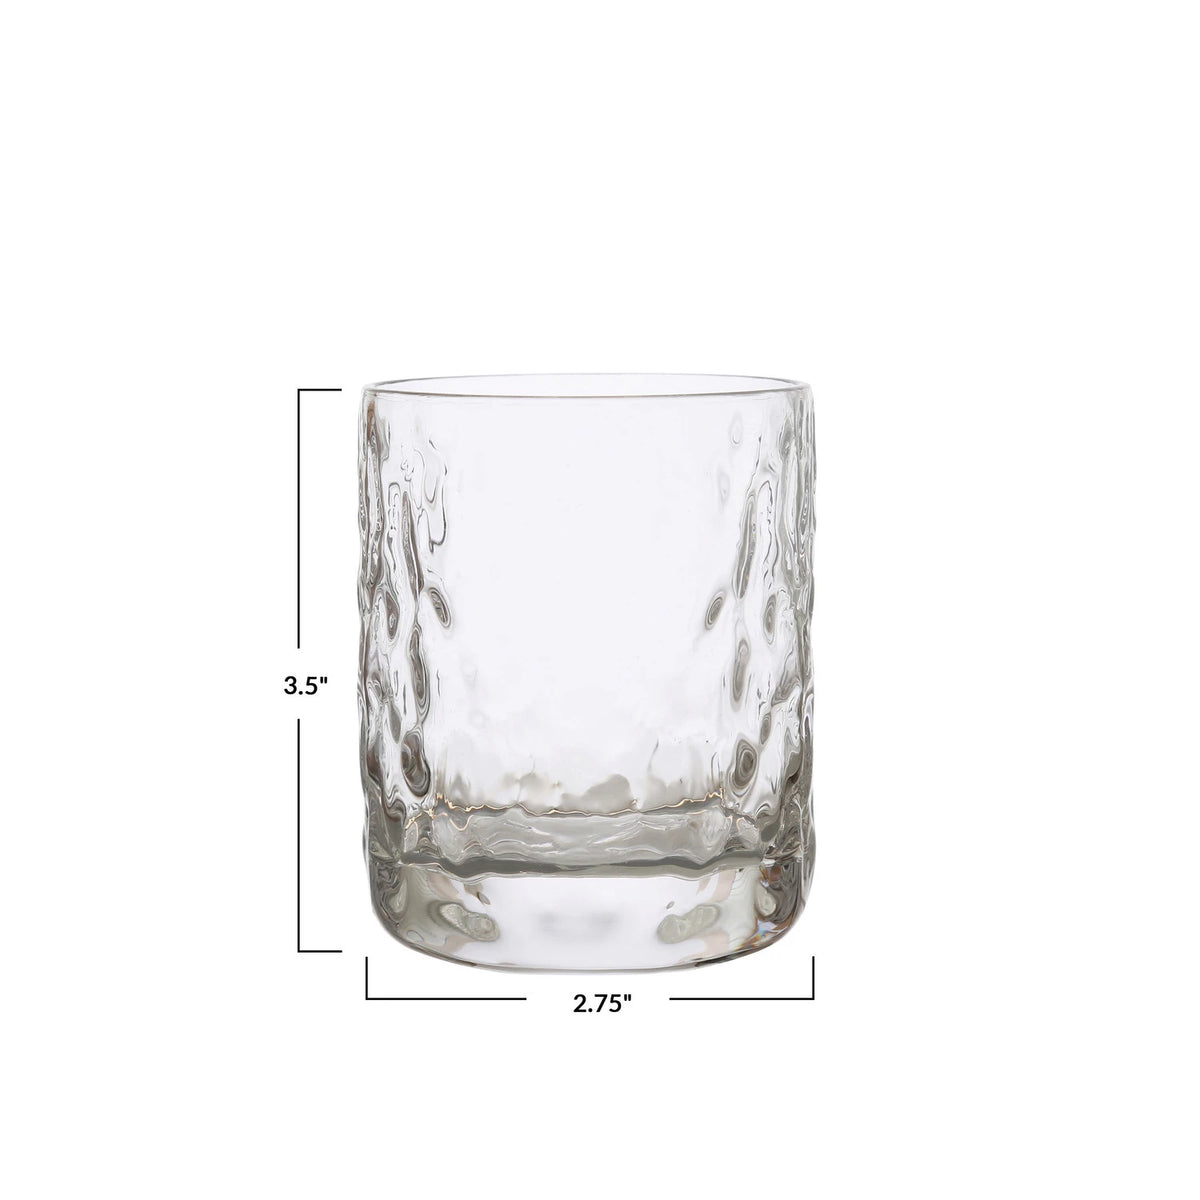 Bloomingville Hammered Drinking Glasses, 8 oz - Set of 6 - lily & onyx